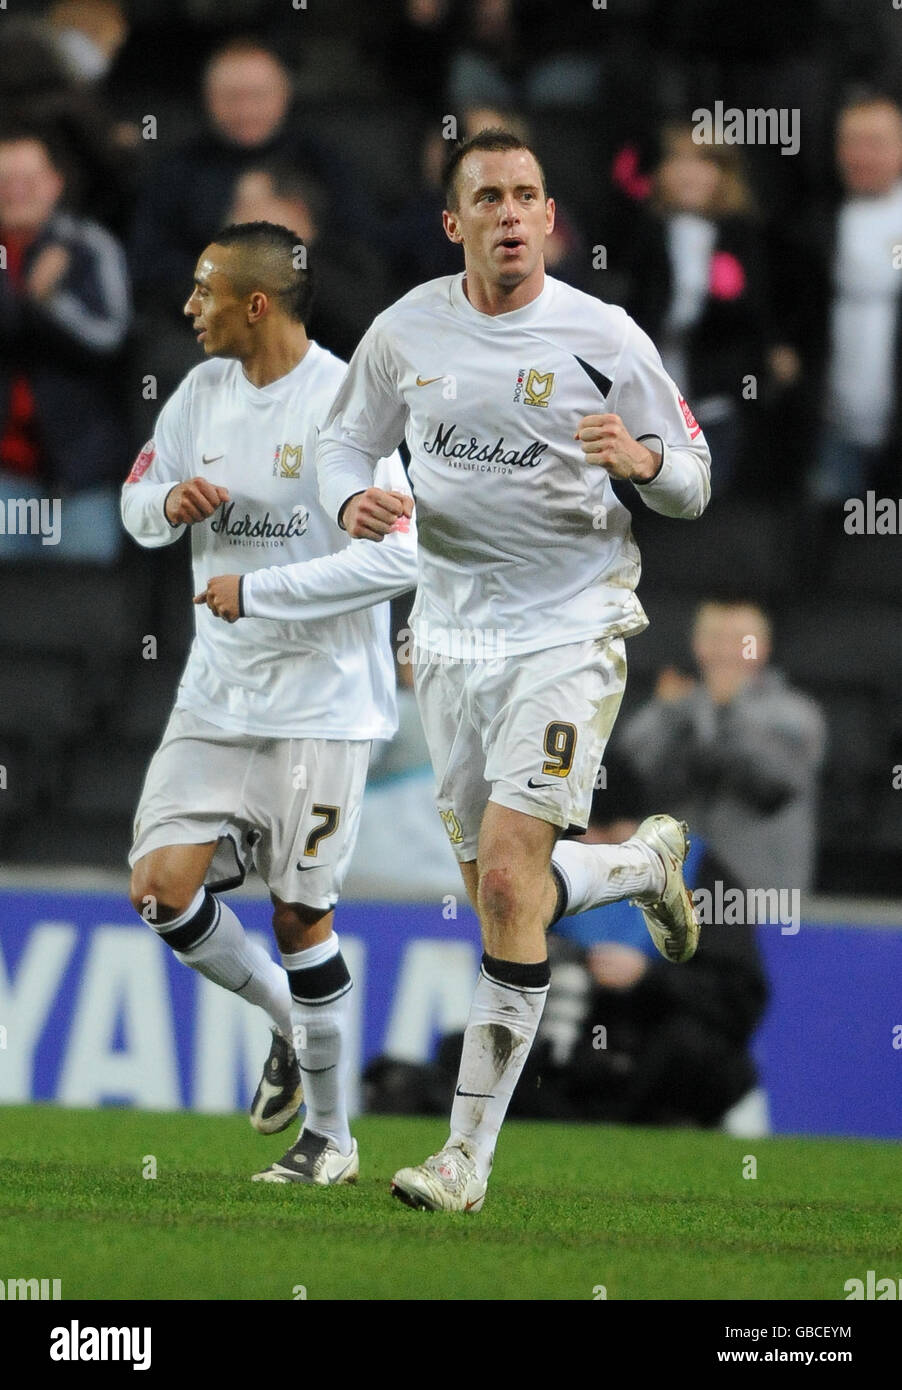 Milton Keynes Dons' and Aaron Wilbraham celebrates scoring against Colchester United Stock Photo